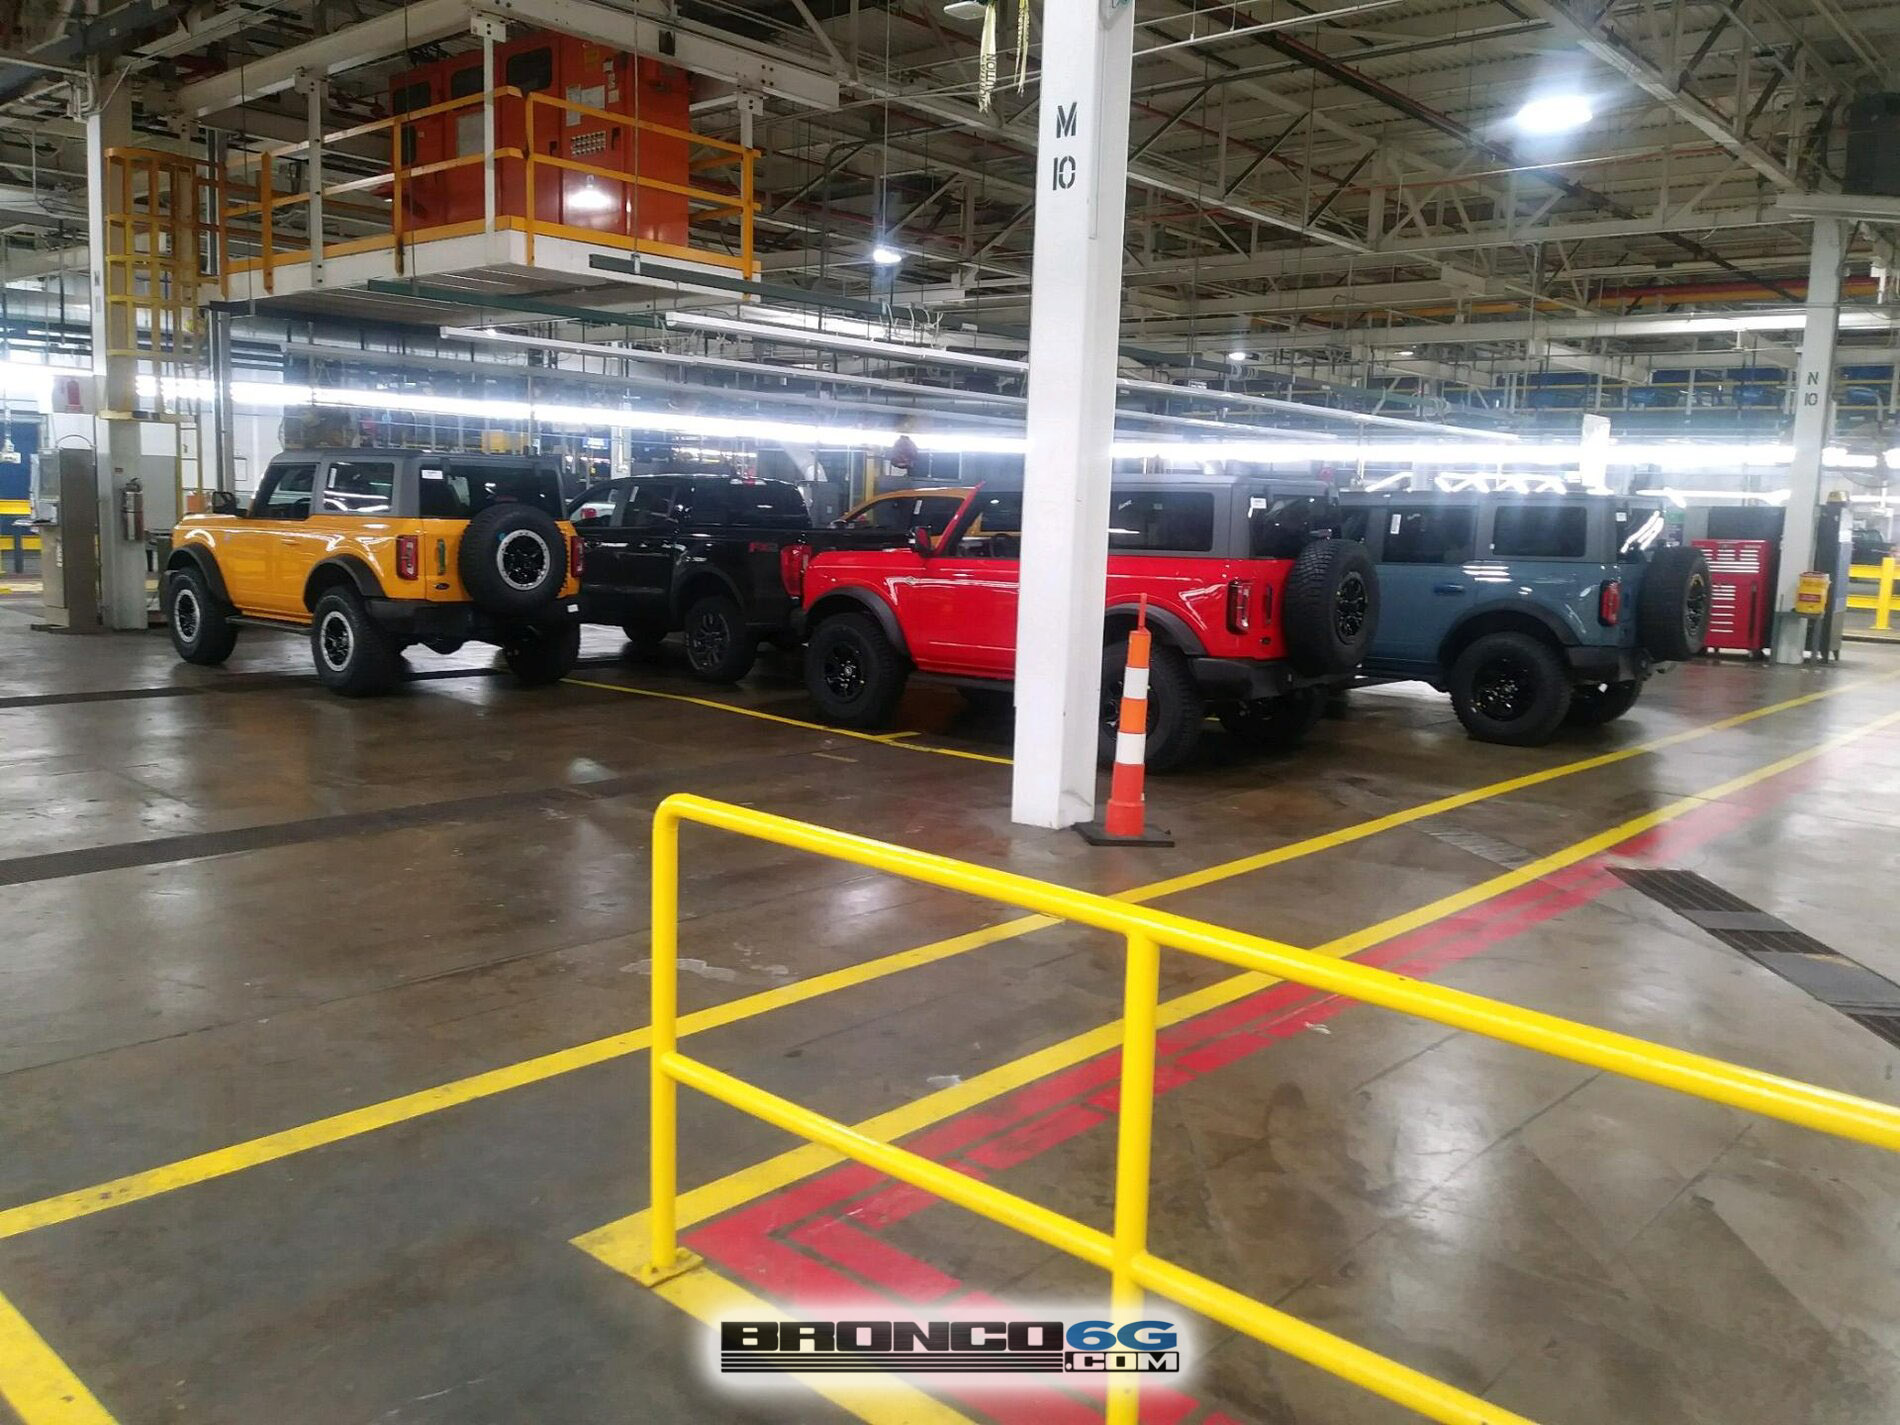 2021 Ford Bronco Production Factory Exterior Interior 6.jpg